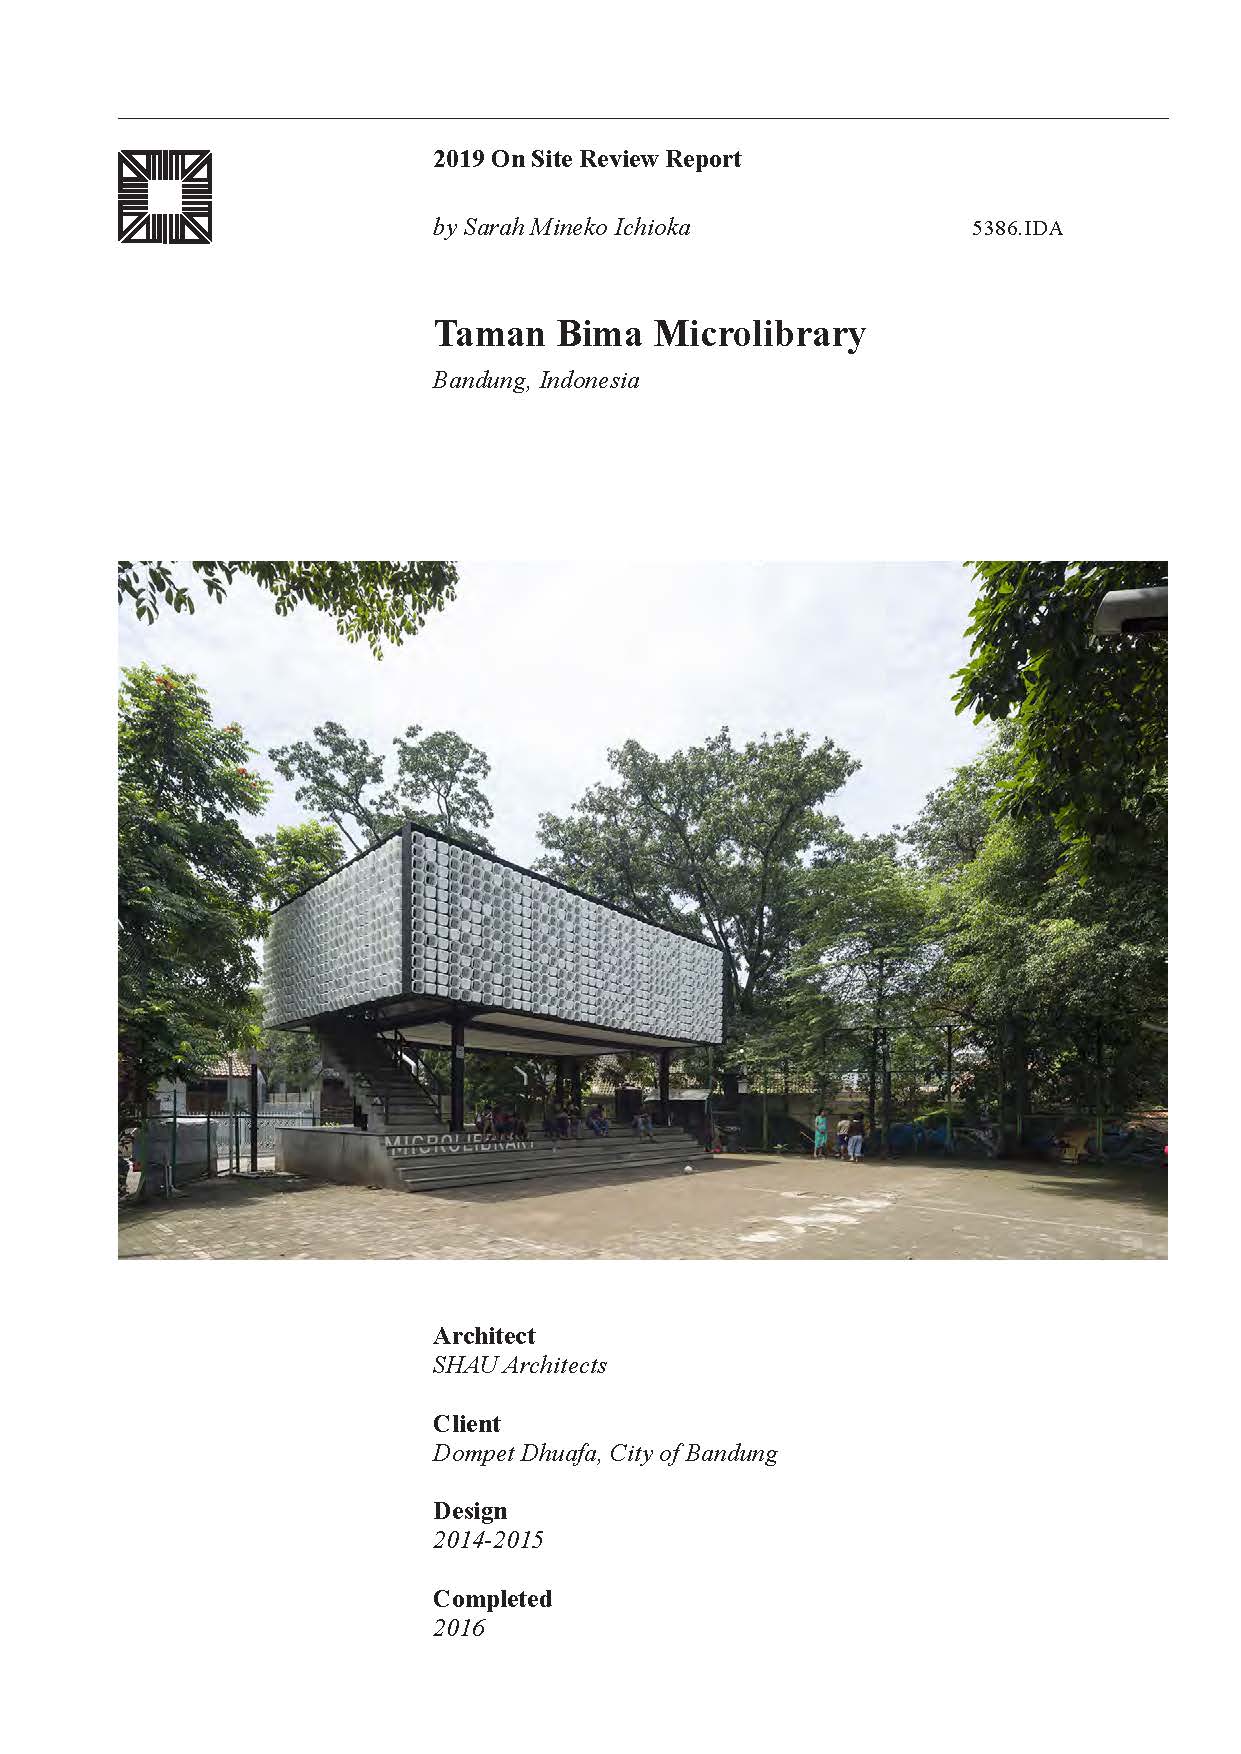 Taman Bima Microlibrary - The On-site Review Report, formerly called the Technical Review, is a document prepared for the Aga Khan Award for Architecture by commissioned independent reviewers who report to the Master Jury about a specific shortlisted project. The reviewers are architectural professionals specialised in various disciplines, including housing, urban planning, landscape design, and restoration. Their task is to examine, on-site, the shortlisted projects to verify project data seek. The reviewers must consider a detailed set of criteria in their written reports, and must also respond to the specific concerns and questions prepared by the Master Jury for each project. This process is intensive and exhaustive making the Aga Khan Award process entirely unique.